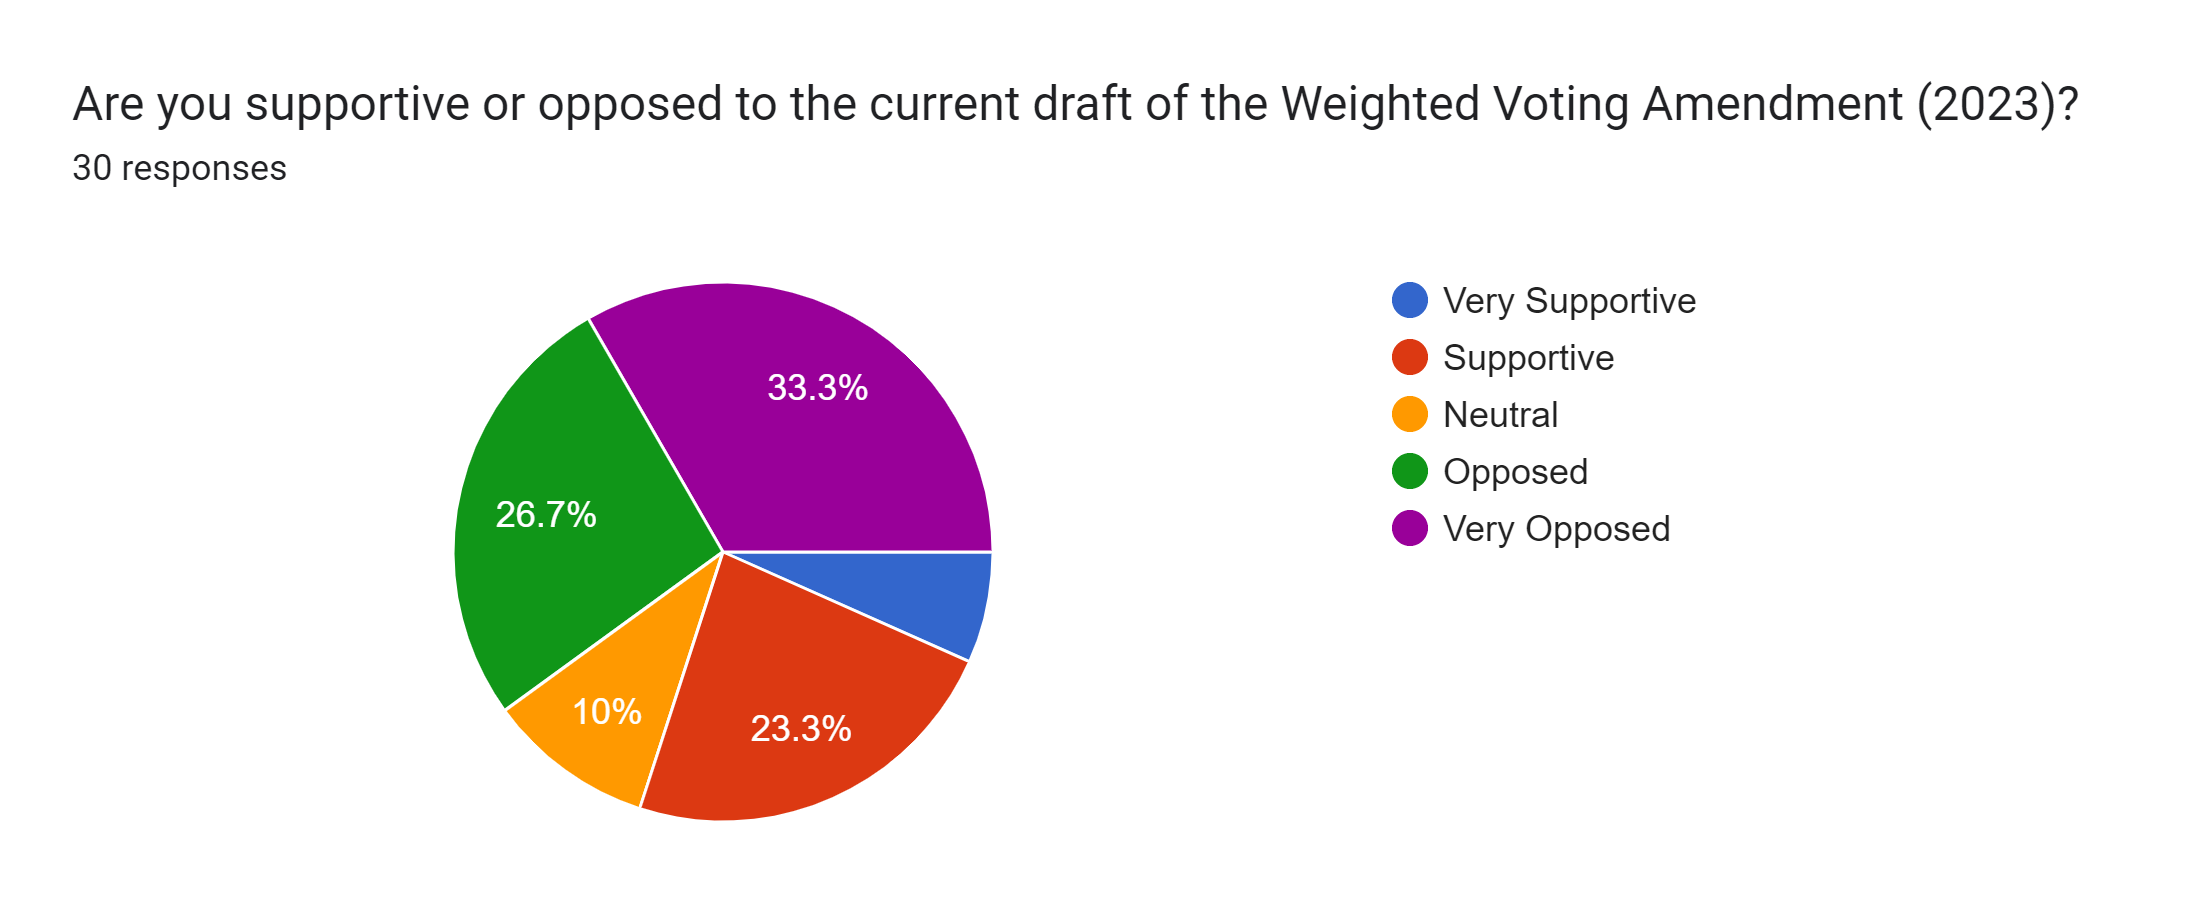 Forms response chart. Question title: Are you supportive or opposed to the current draft of the Weighted Voting Amendment (2023)?. Number of responses: 30 responses.